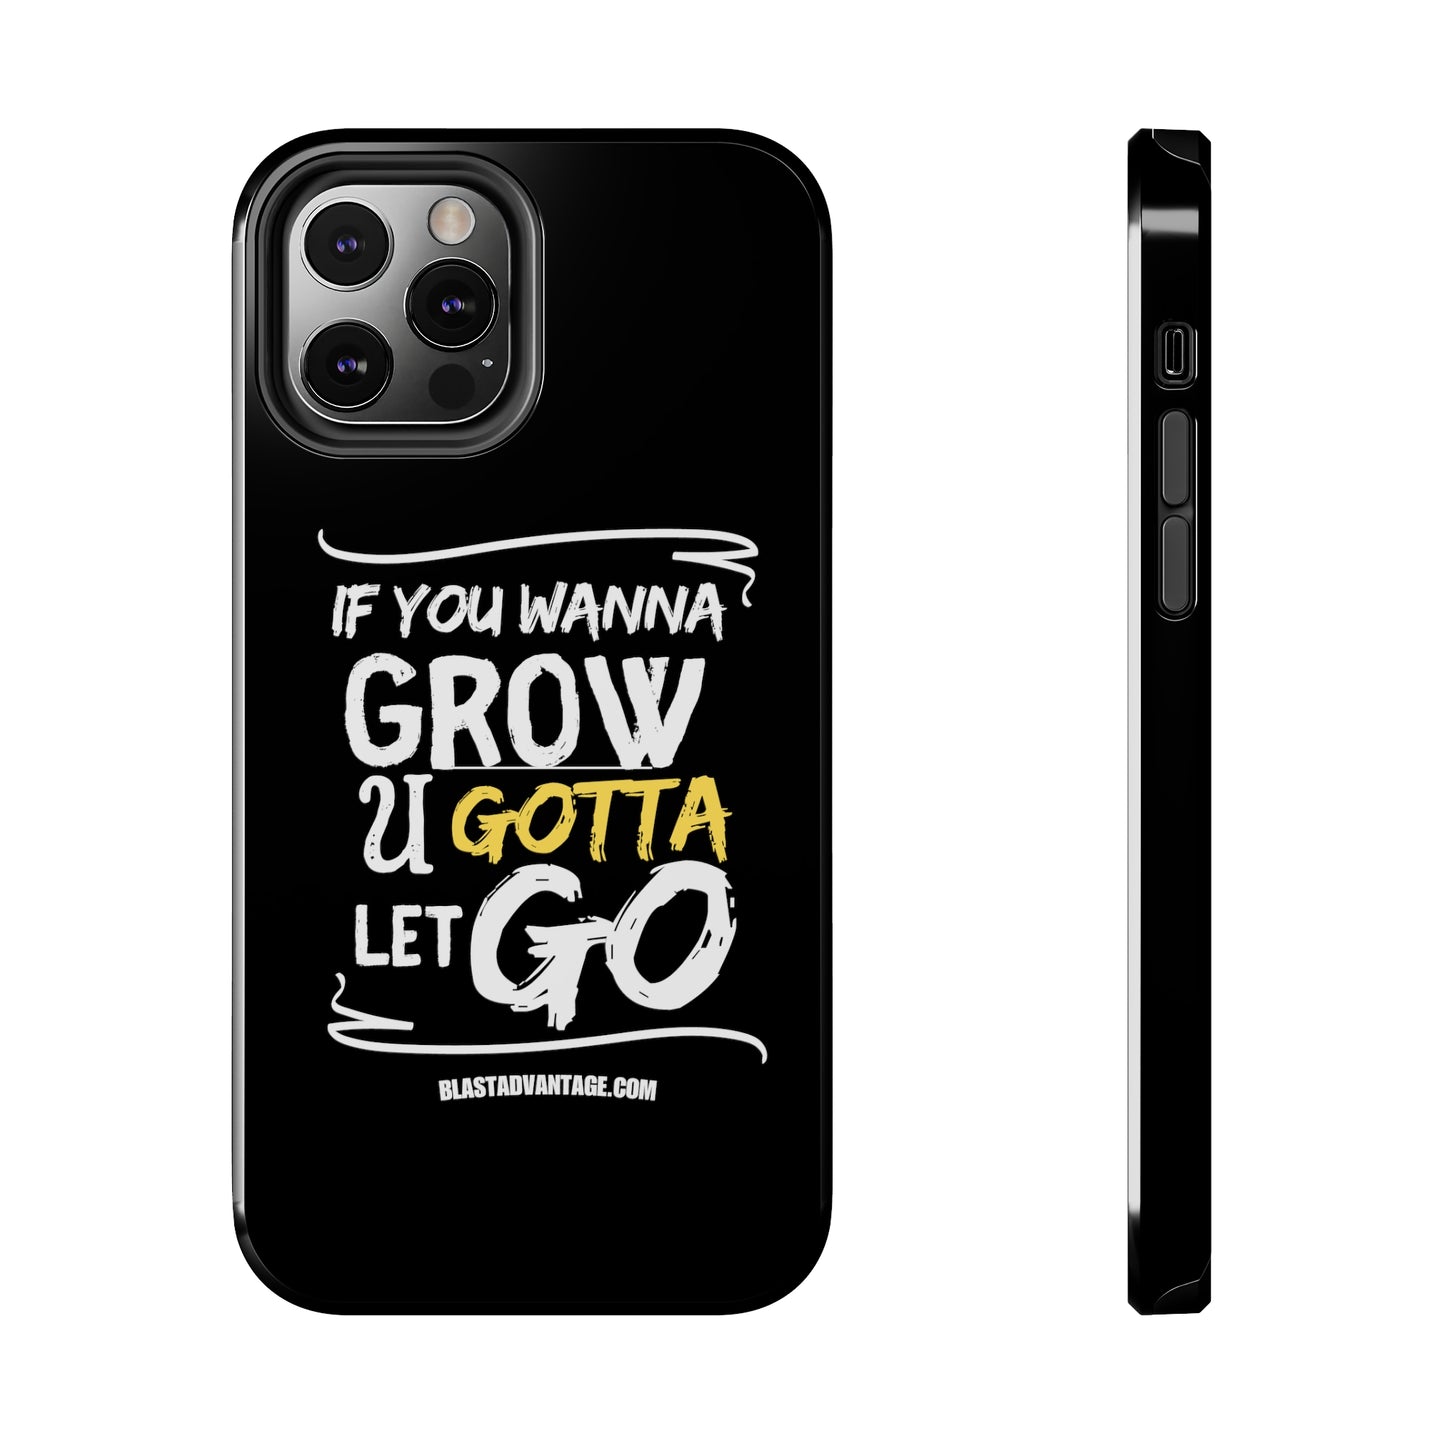 Let Go, Grow, and Soar: Inspirational iPhone Case for Personal Growth